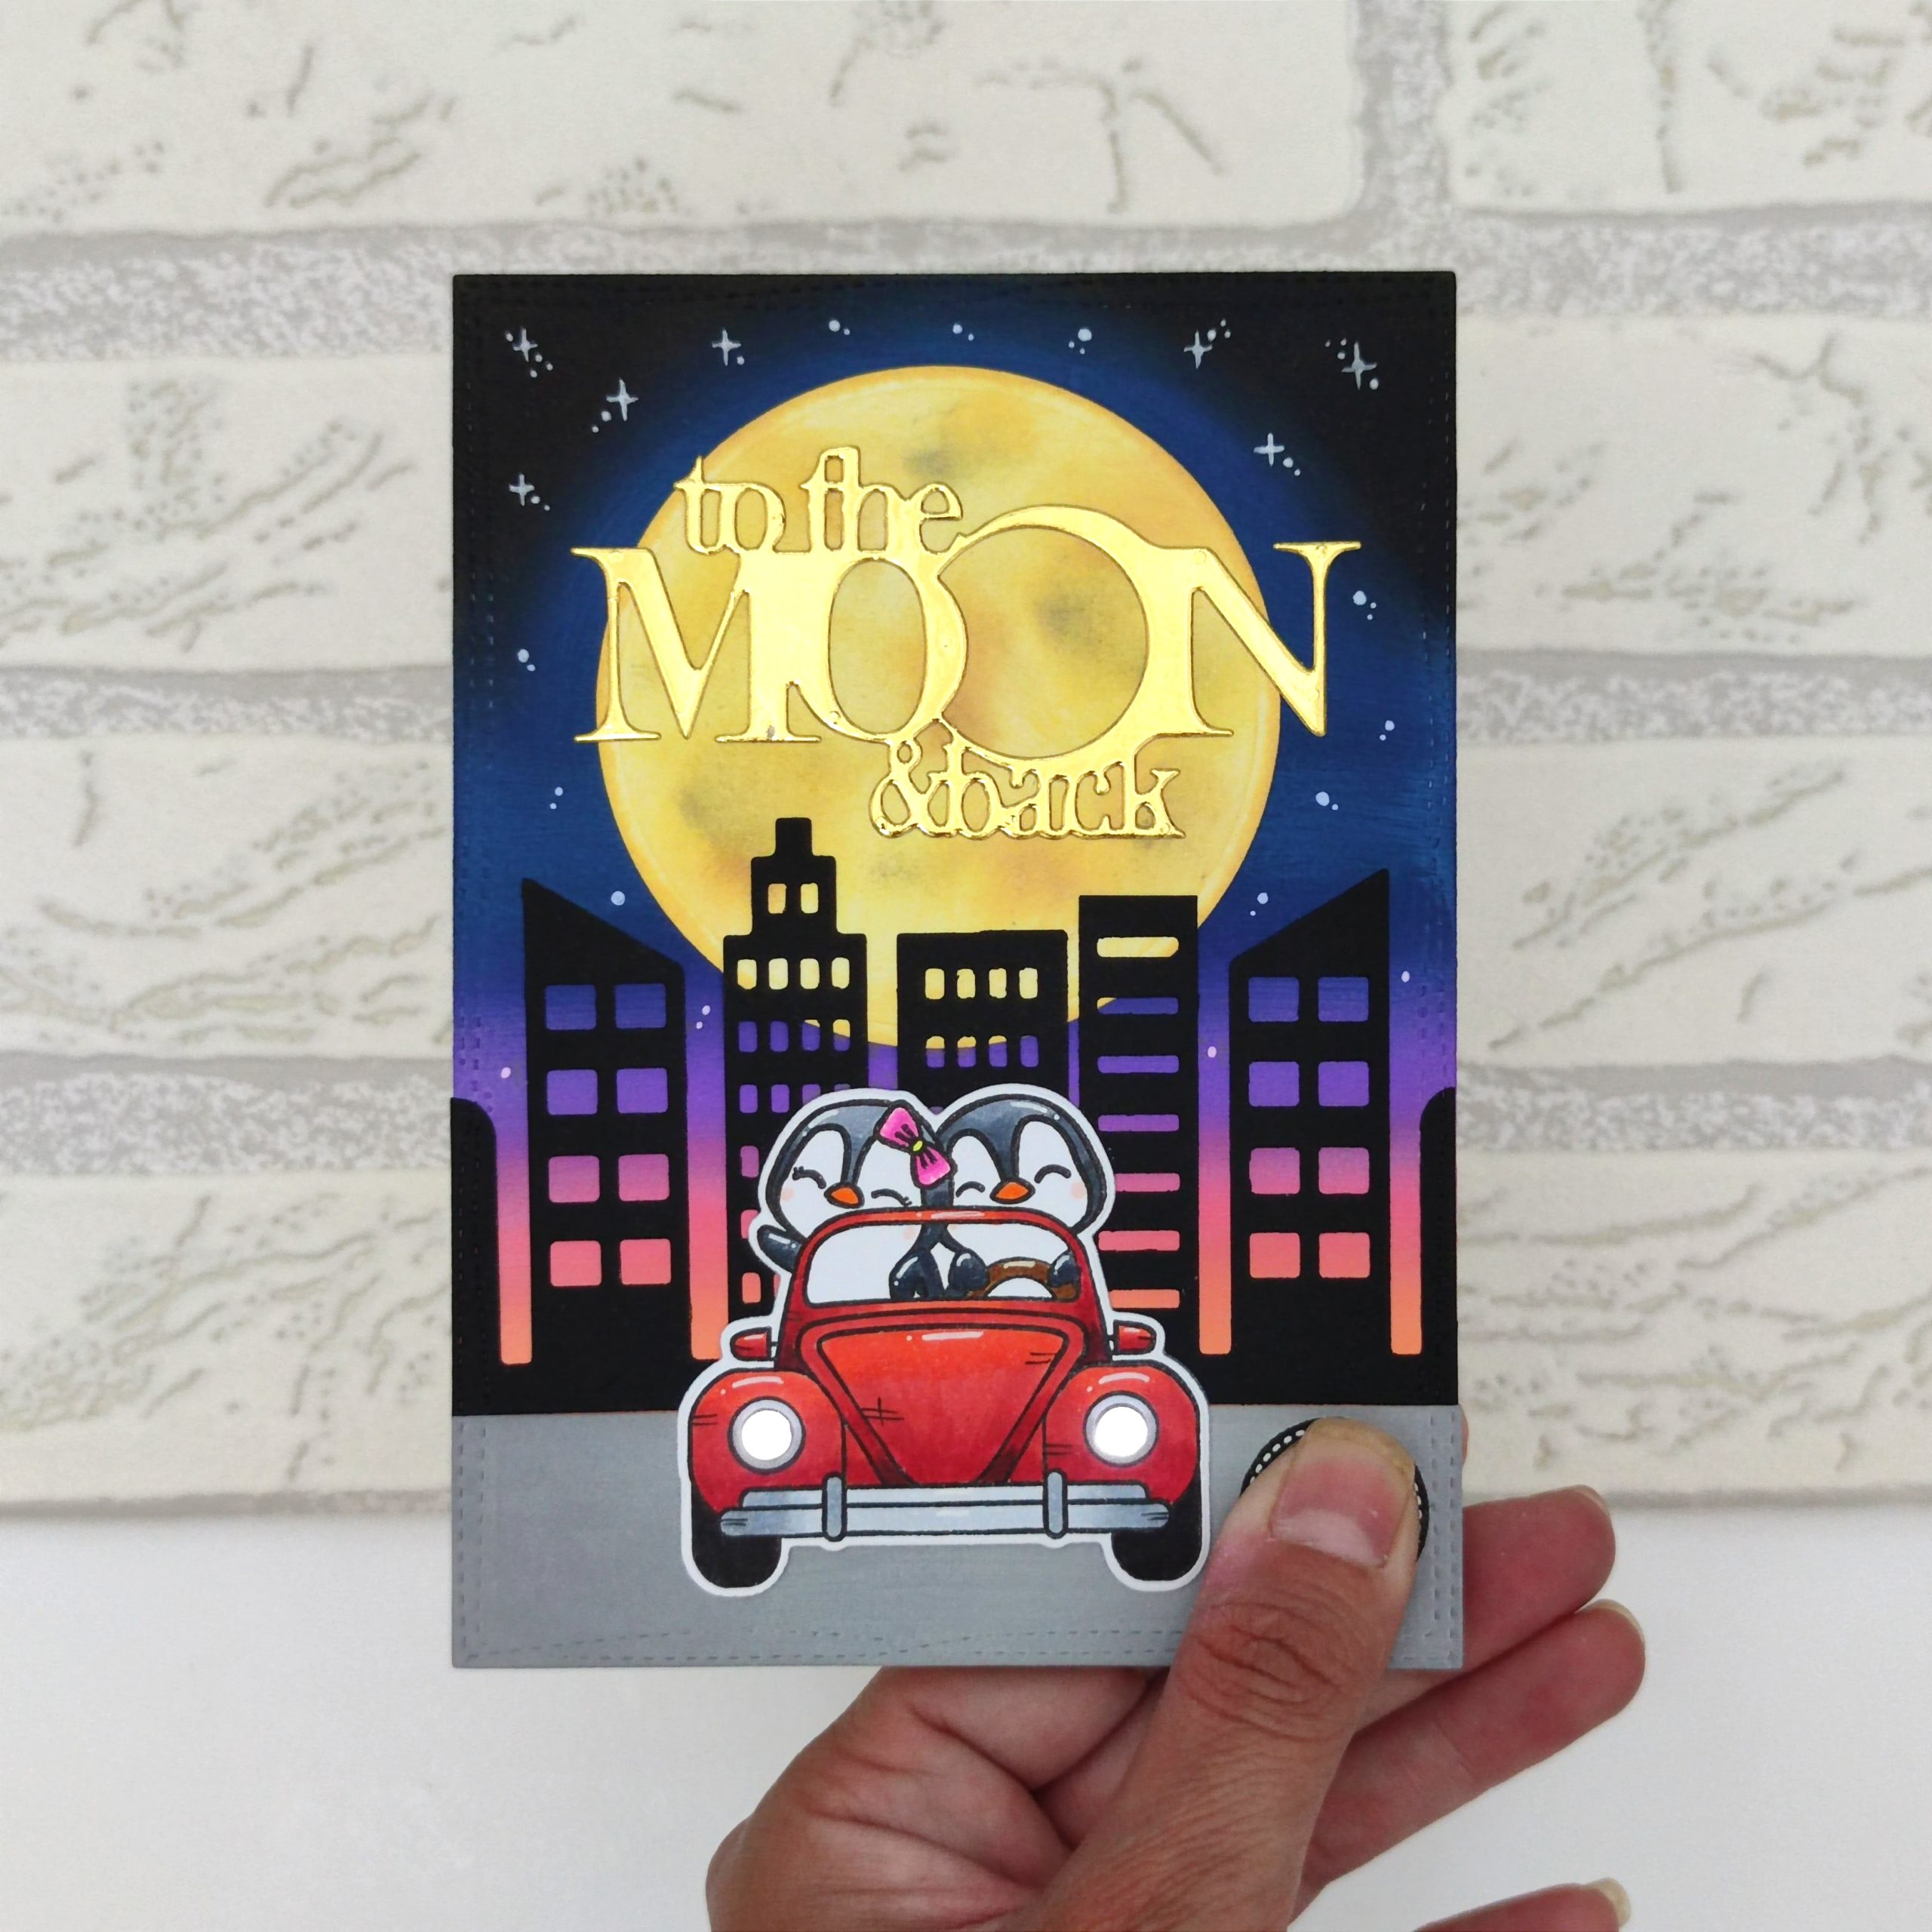 To the Moon and back with Chibitronics LED Stickers